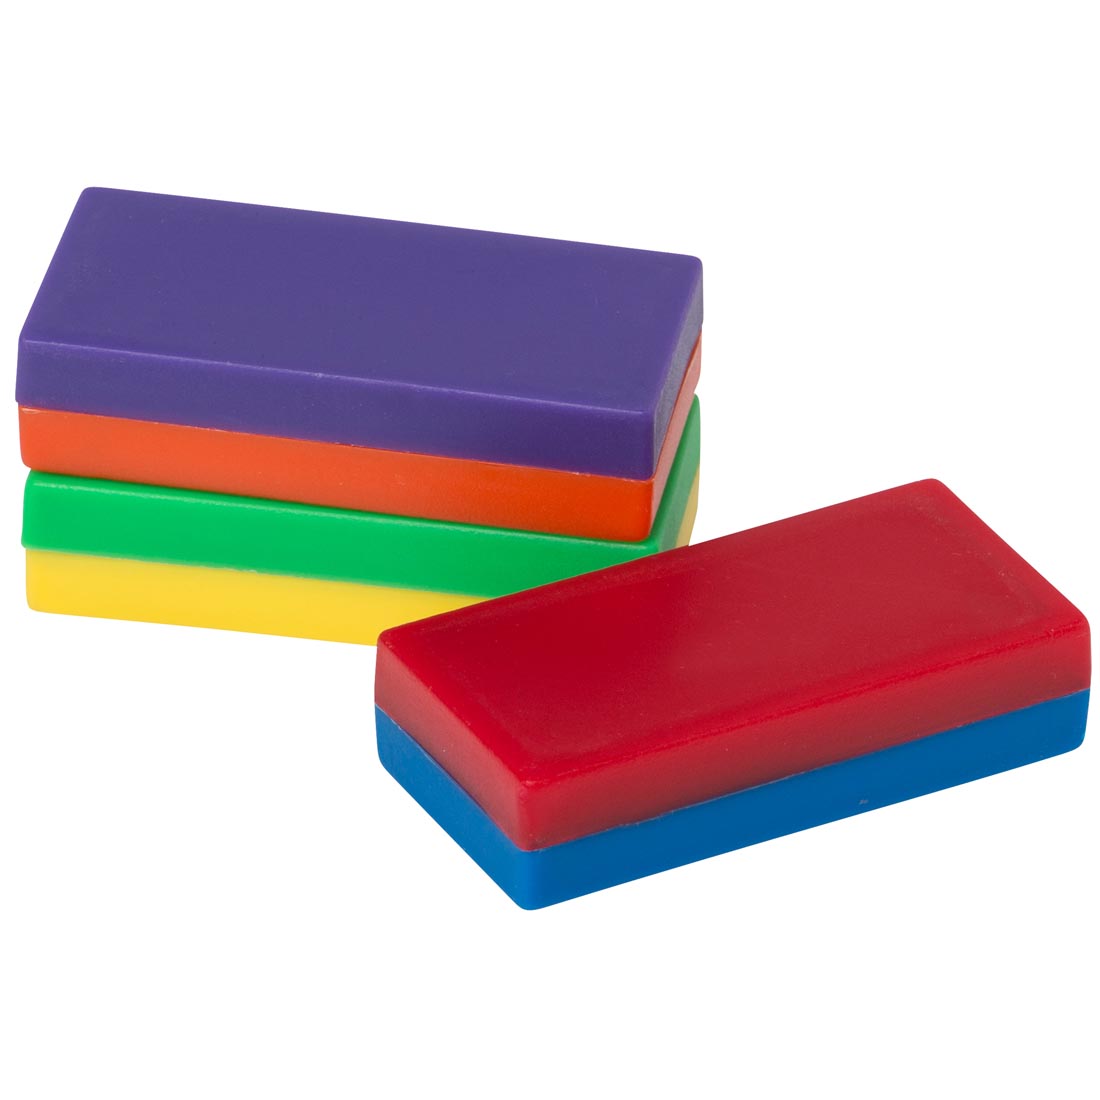 Three 2-Color Big Block Hero Magnets by Dowling Magnets